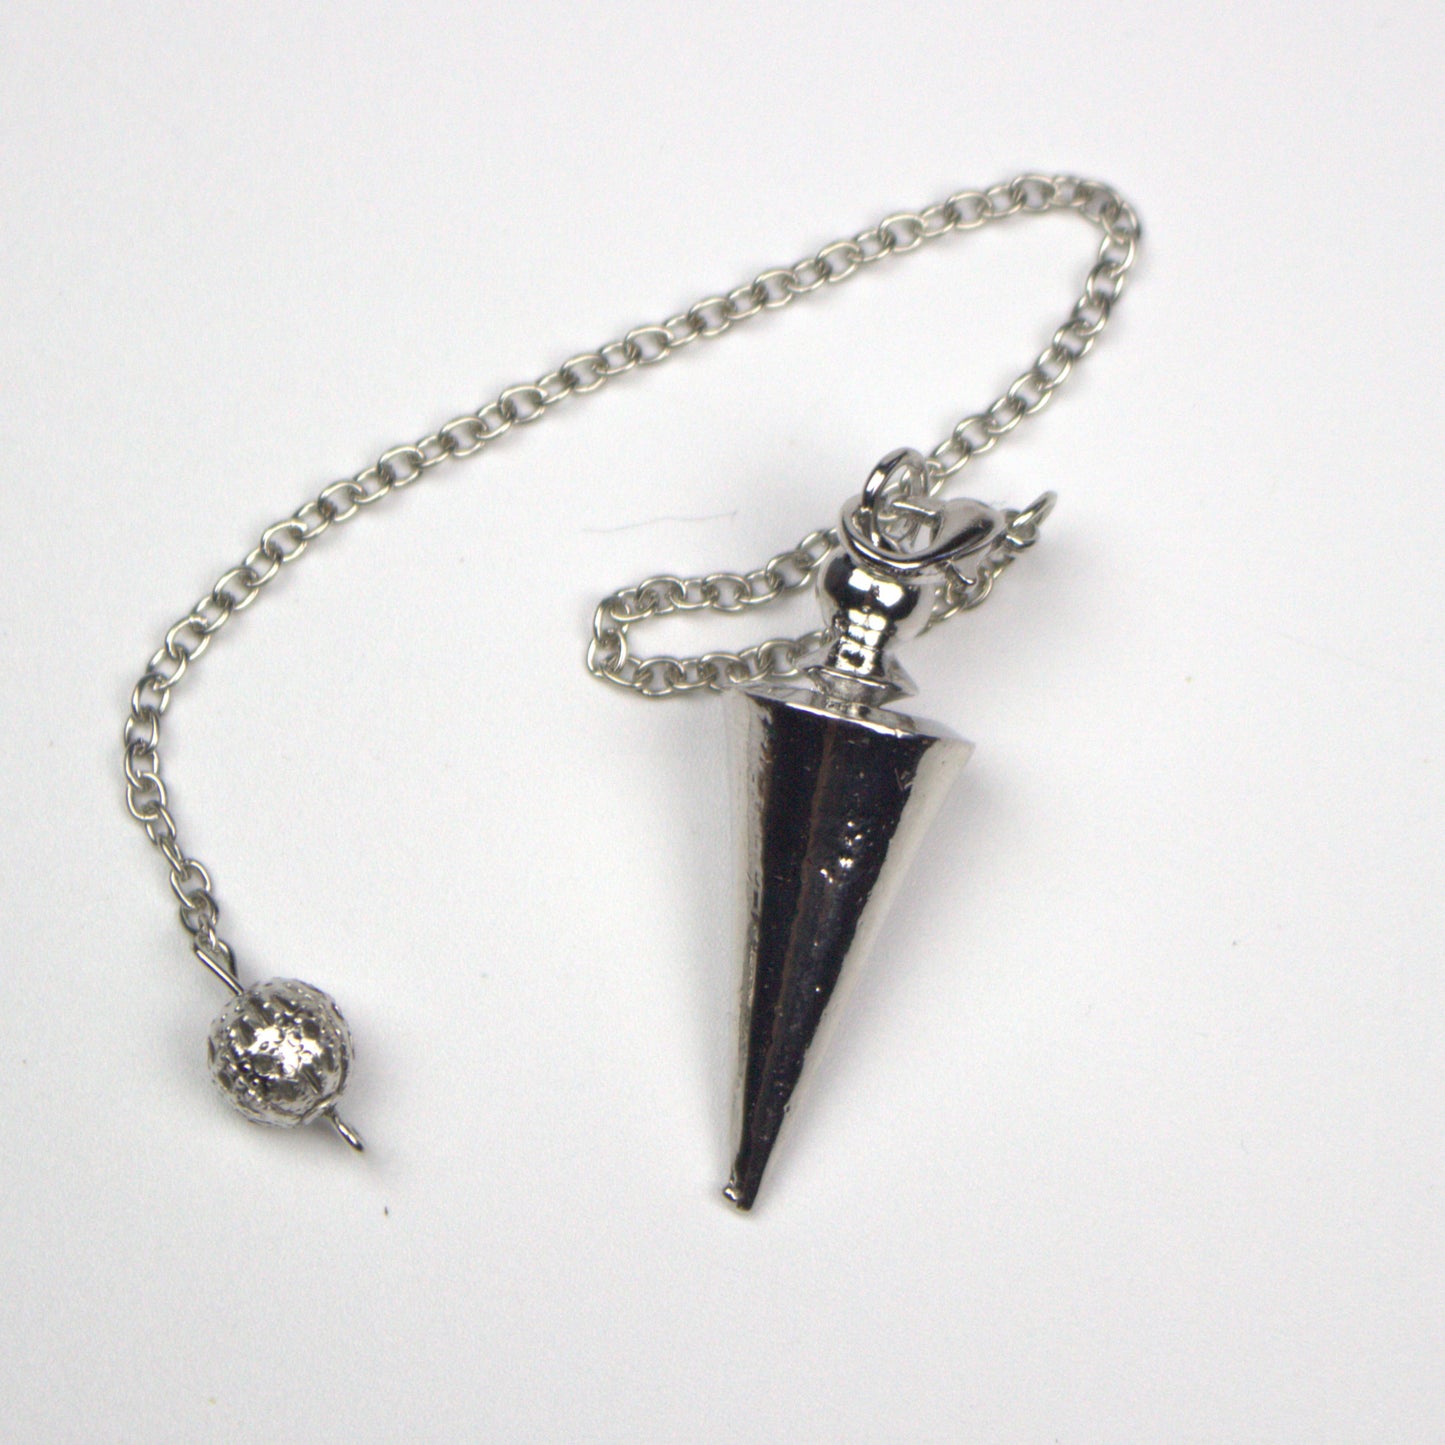 Silver Pendulum- Dowsing and Divination, great for Reiki, Tarot, Wicca